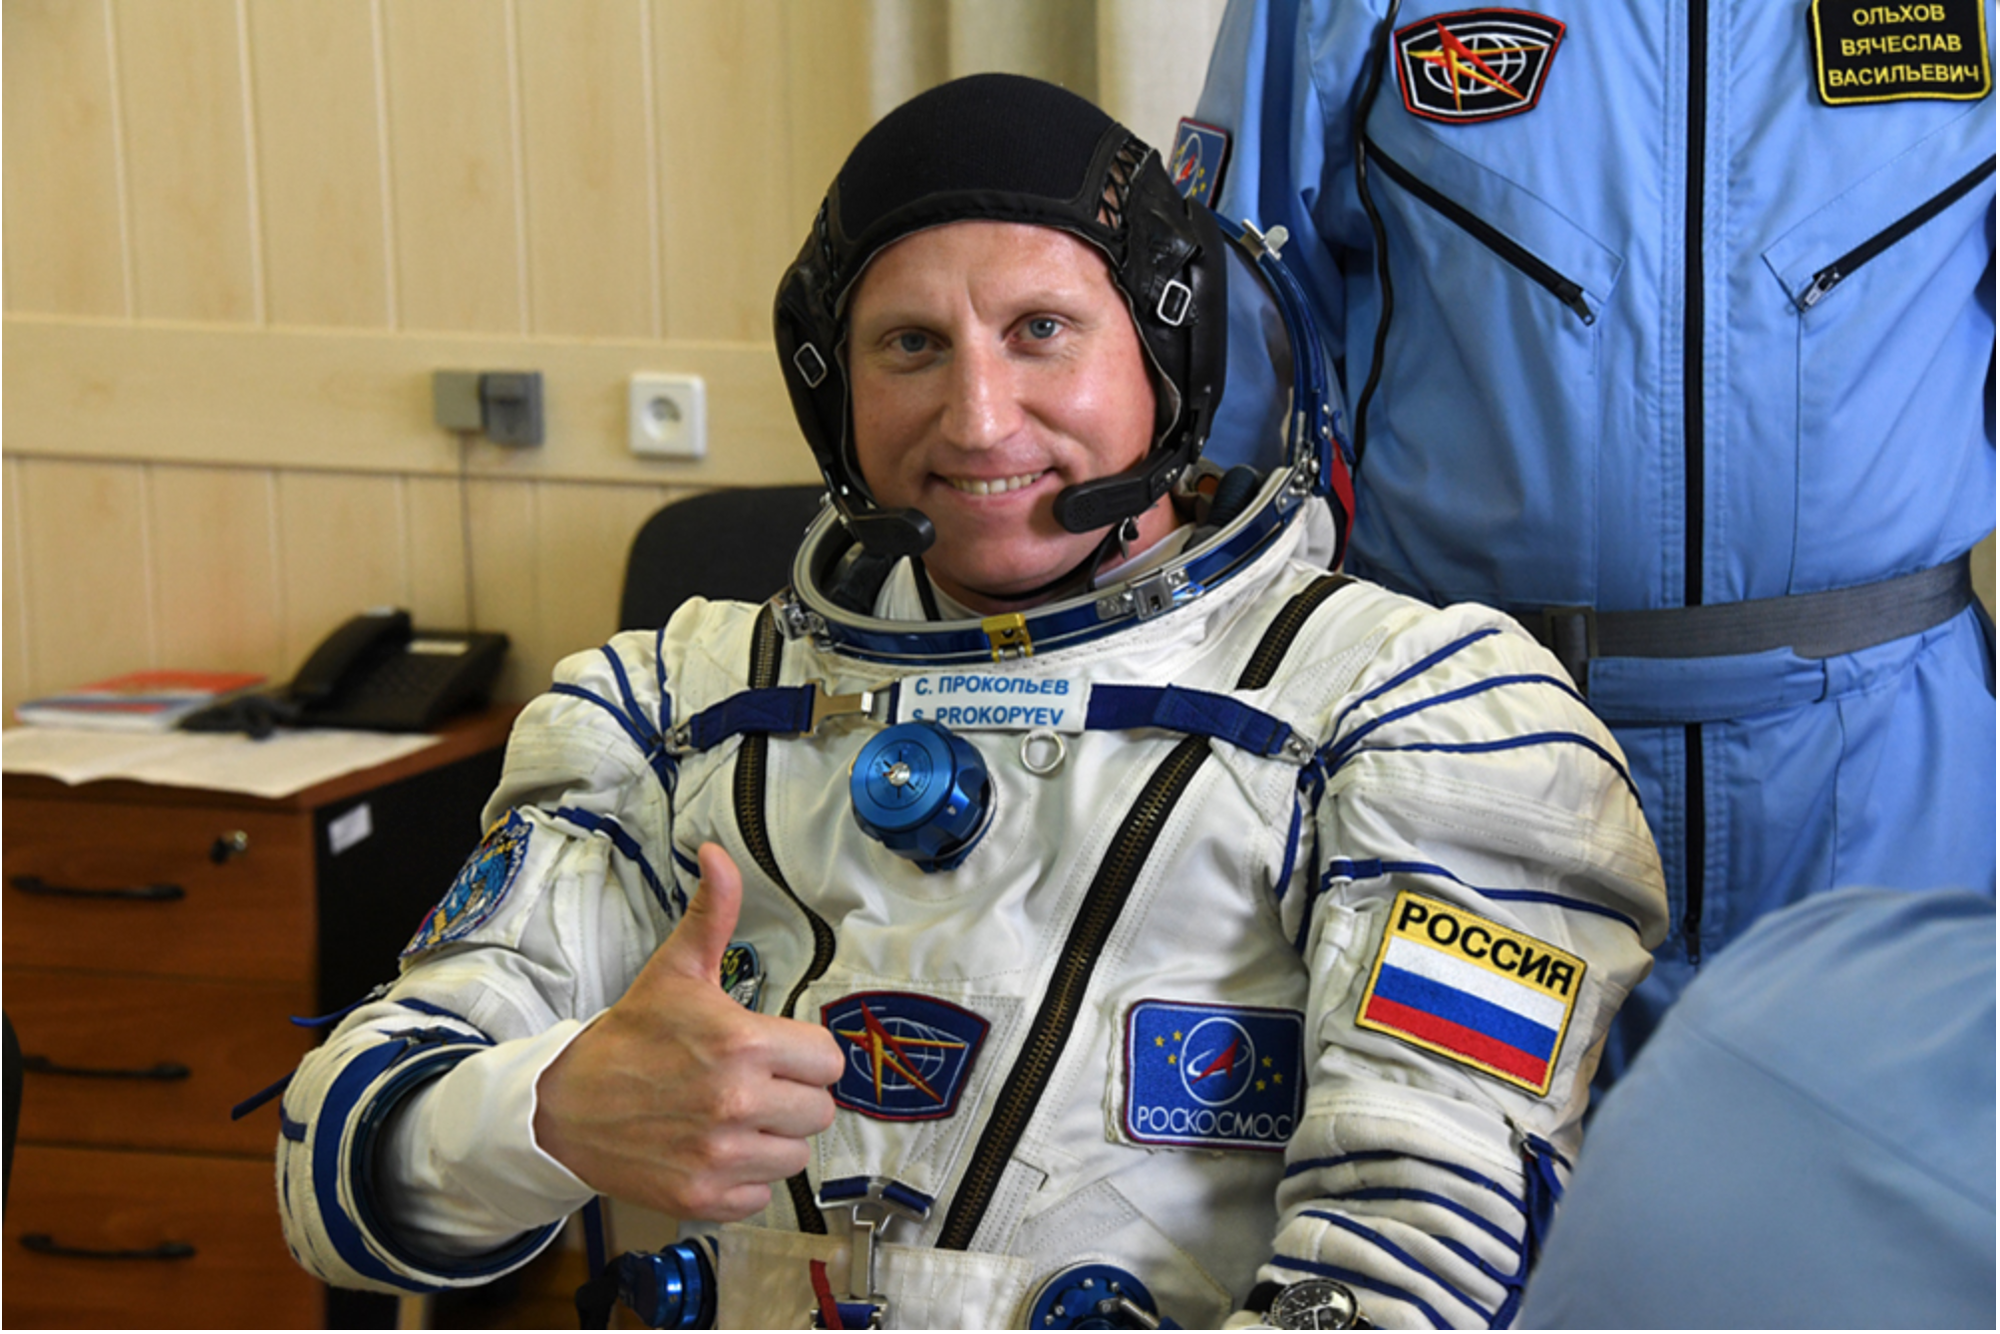 Russian cosmonaut Sergey Prokopiev prior to launch to the ISS in June 2018; space food, coffee or die